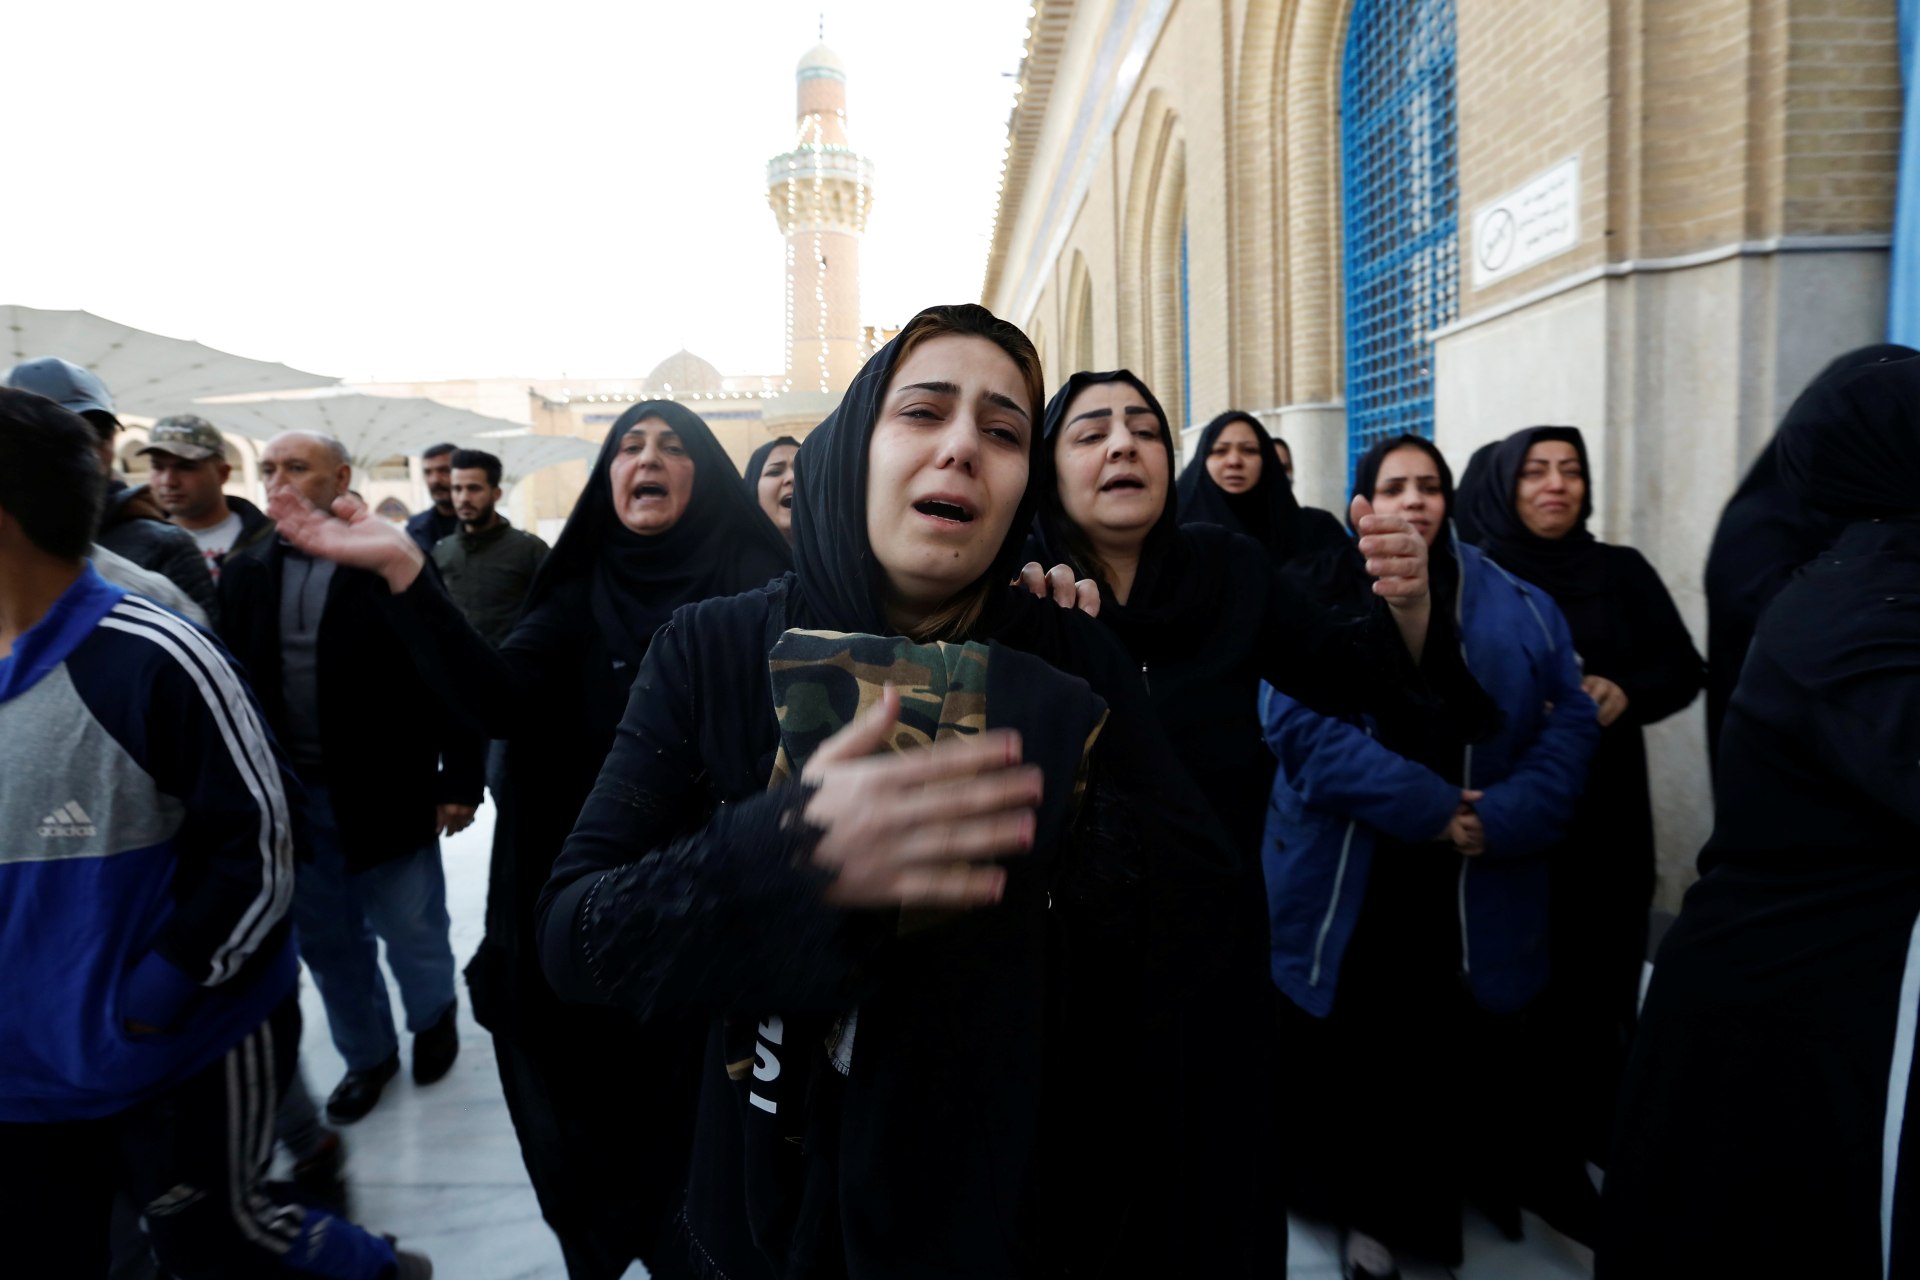 Women mourn during the funeral of a man who was killed in a twin suicide bombing attack in a central Baghdad market, at the shrine of Sheikh Abdul Qadir Jeelani in Baghdad (Reuters)